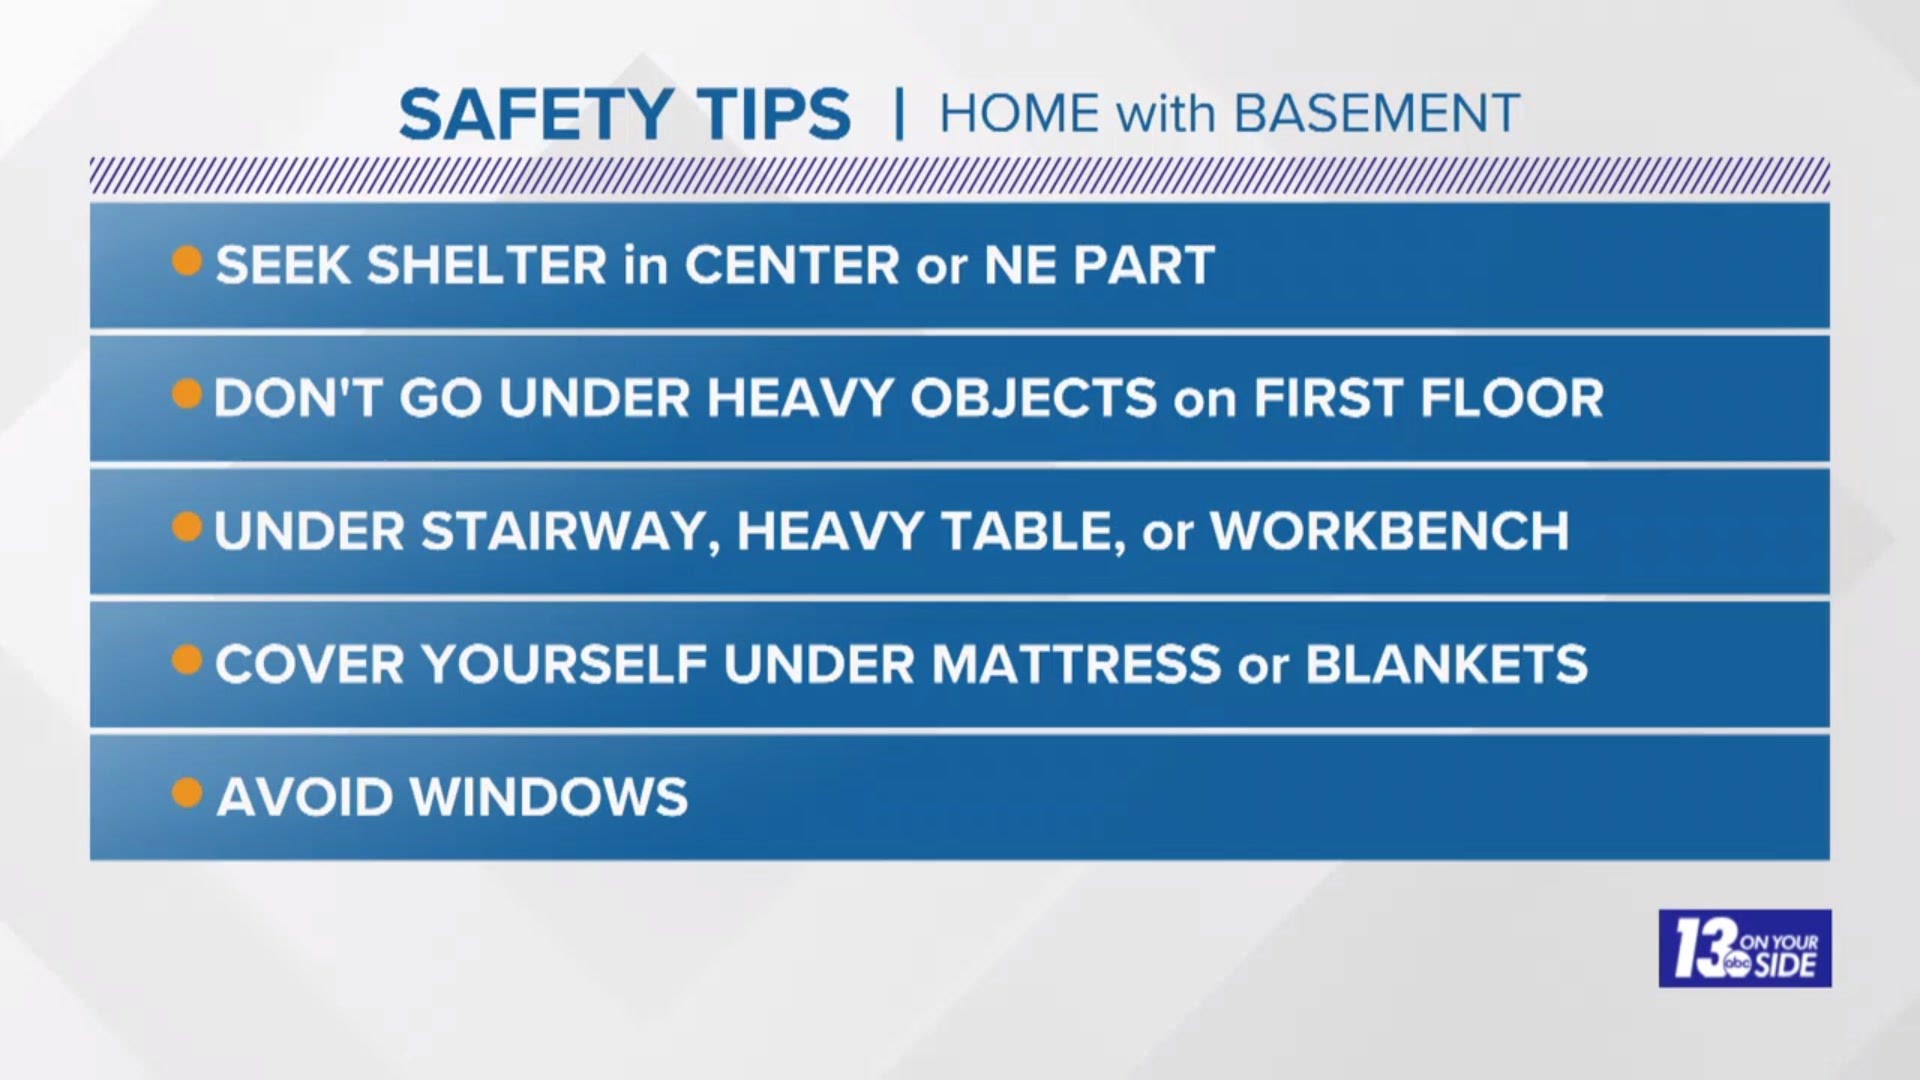 Find your 'safe place' shelter location before severe weather strikes!